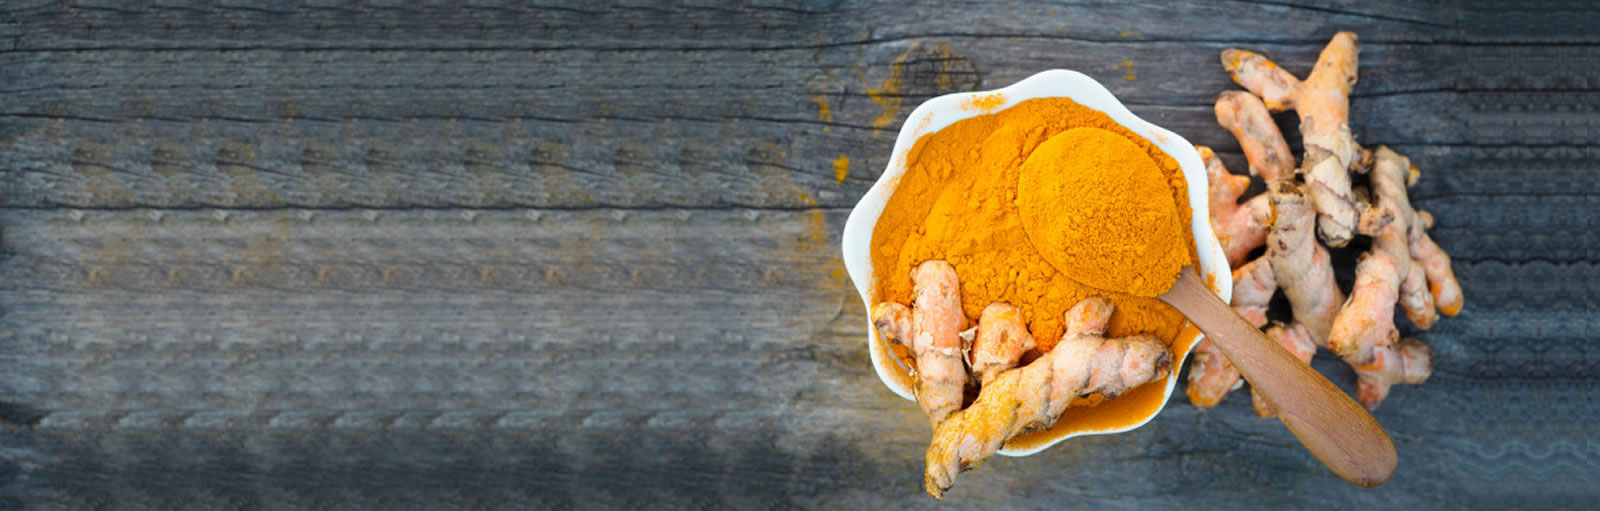 5 Surprising Natural Painkillers: Boswellia, Turmeric, and More